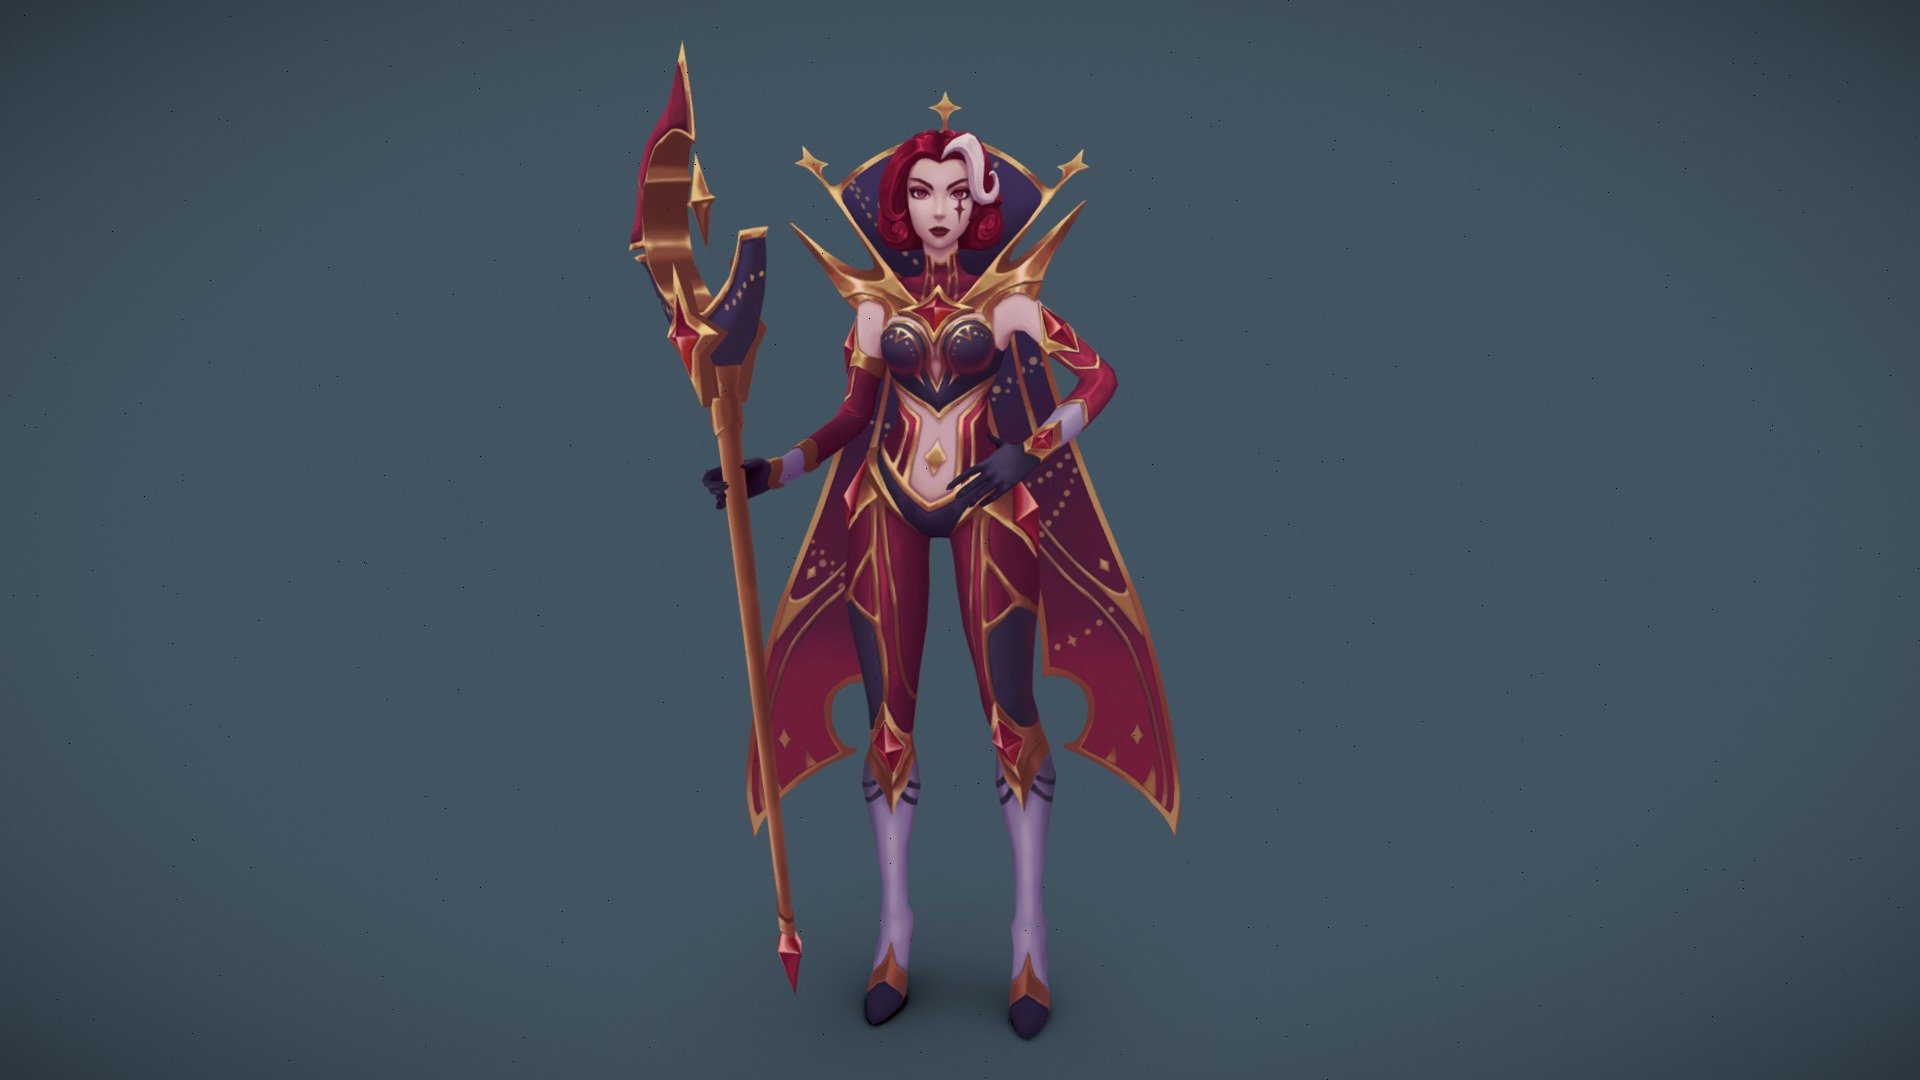 This is a fan skin I've created for my portfolio!
Based on this amazing concept: https://www.artstation.com/artwork/8w1n2x - Arcana LeBlanc - 3D model by natela 3d model